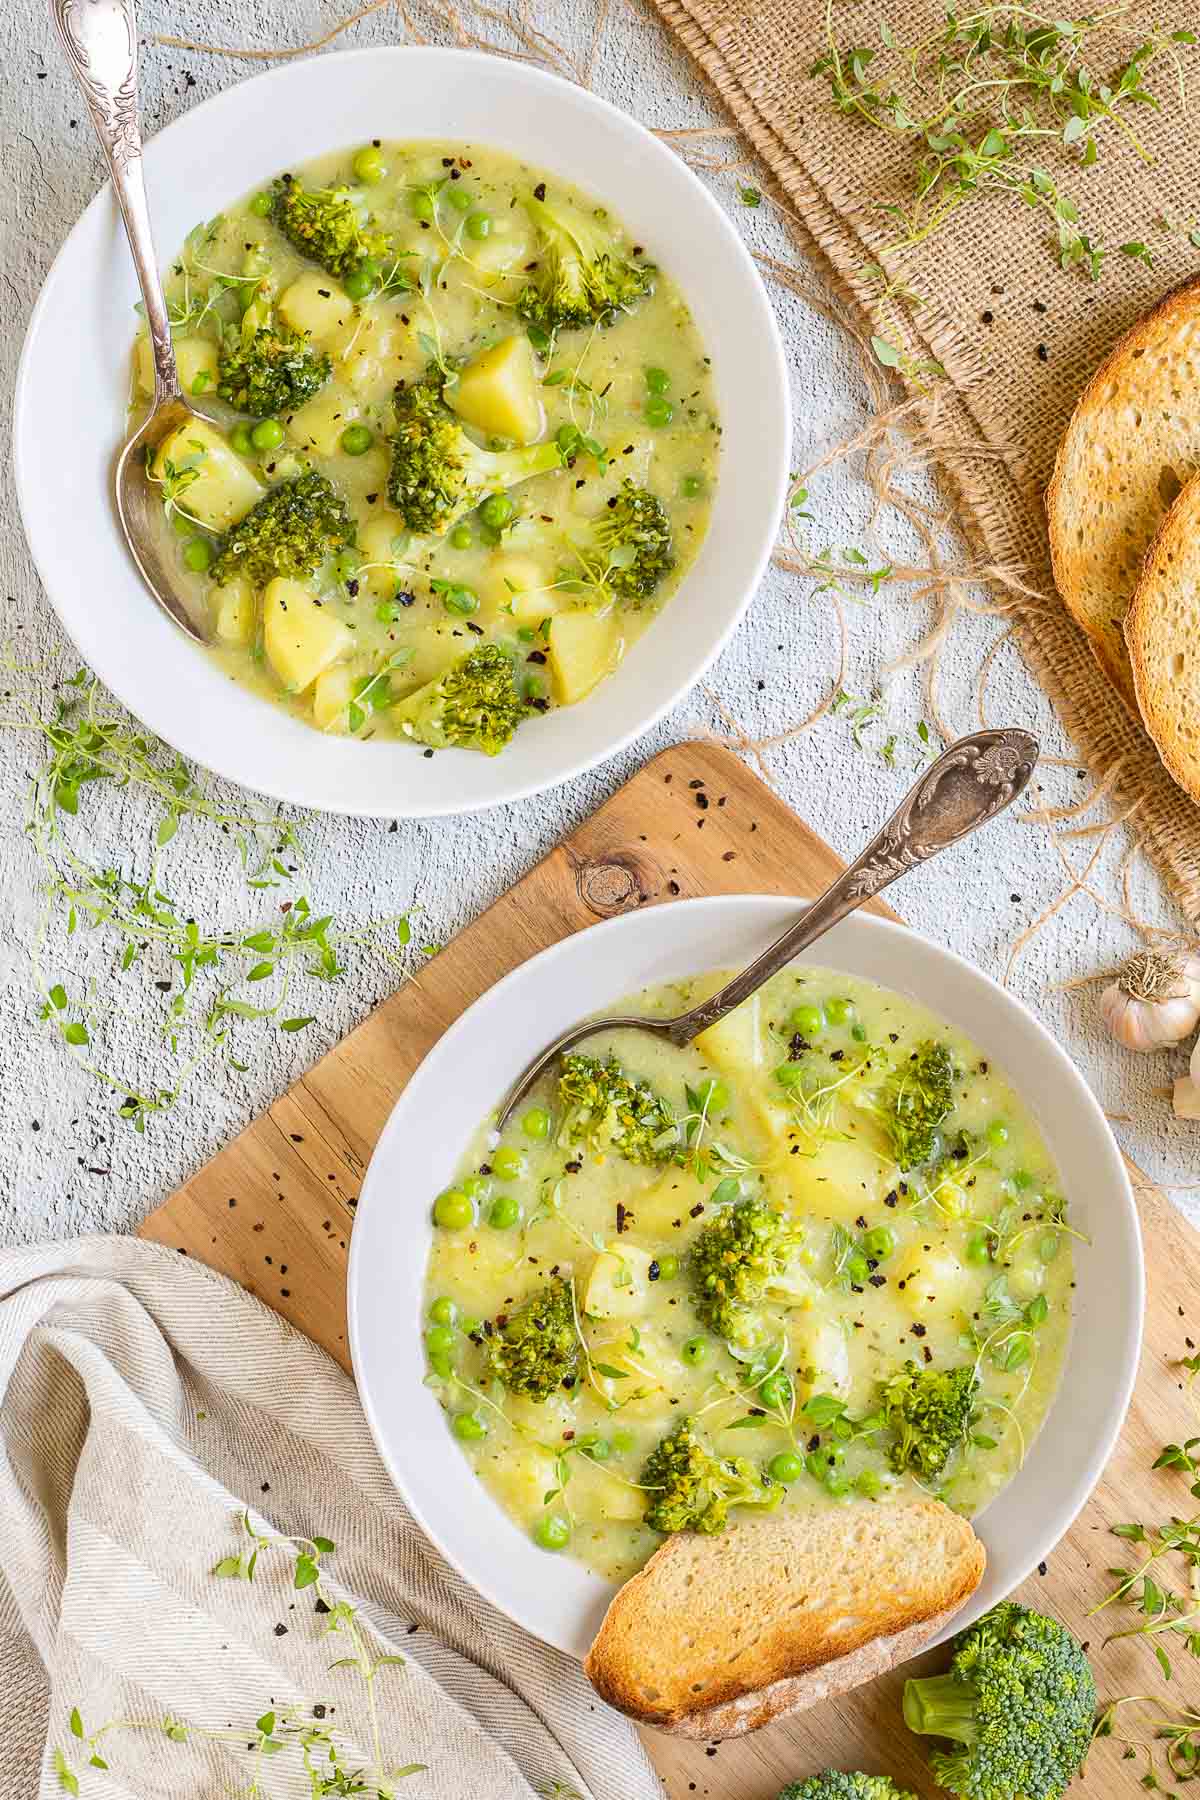 2 white plates of thick yellow stew with potatoes, broccoli, green peas and green herbs. A spoon is placed inside with a toasted slice of bread.